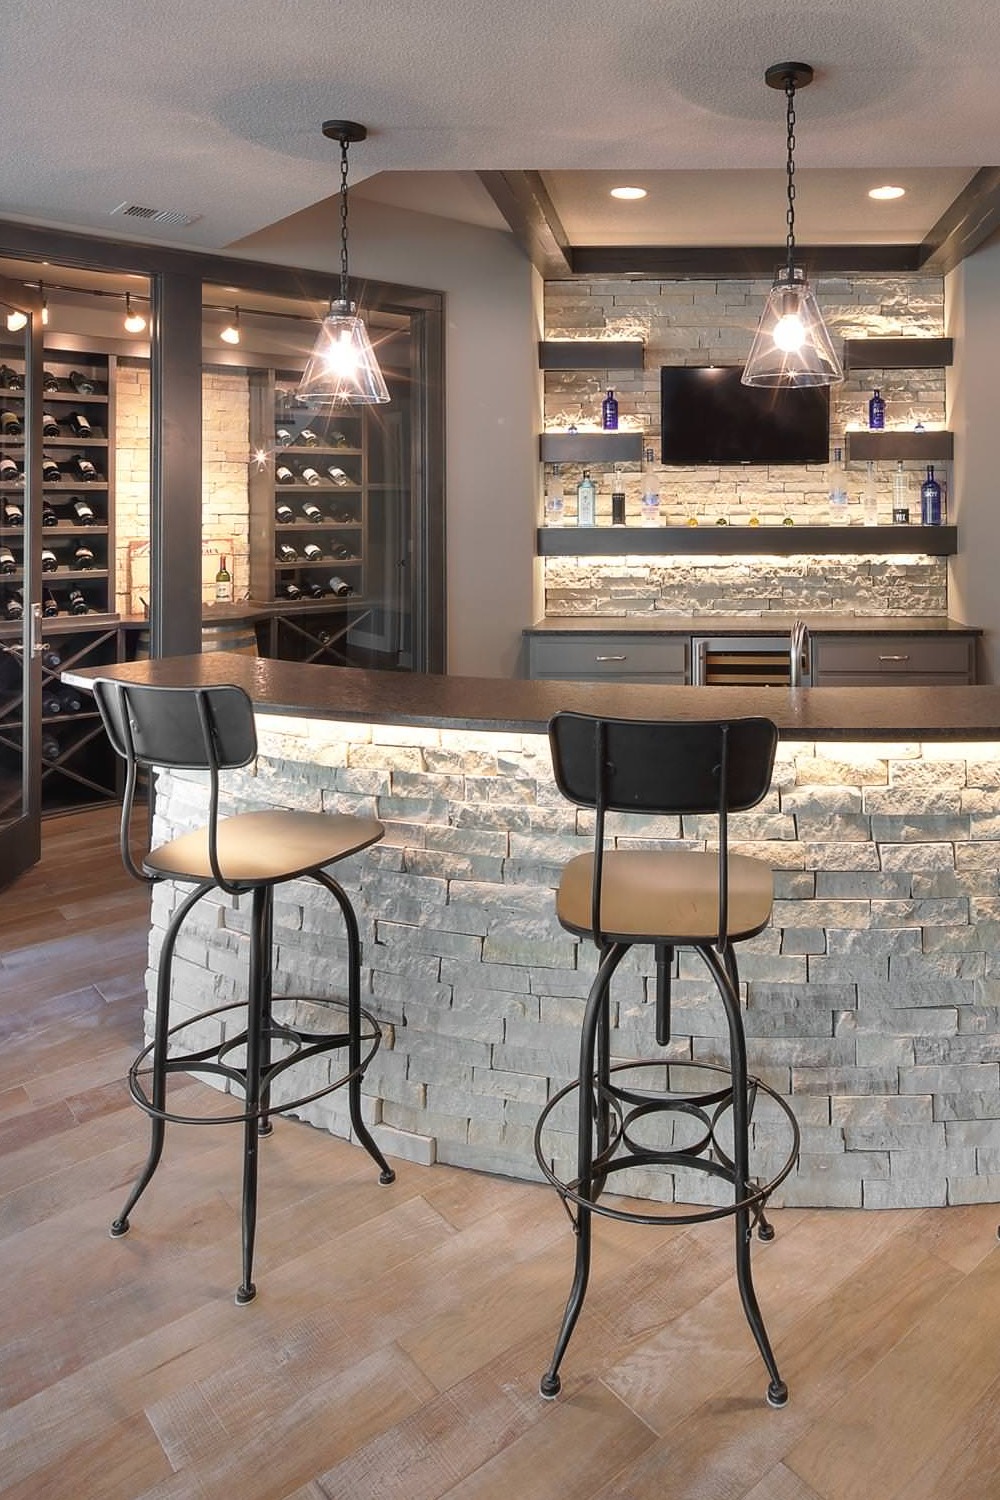 Basement Bar Wet Bar Wall Space Wood Cabinets Lighting Style Custom Stone Modern Room Countertops Stools Inspiration Sink Classic Traditional Shelving